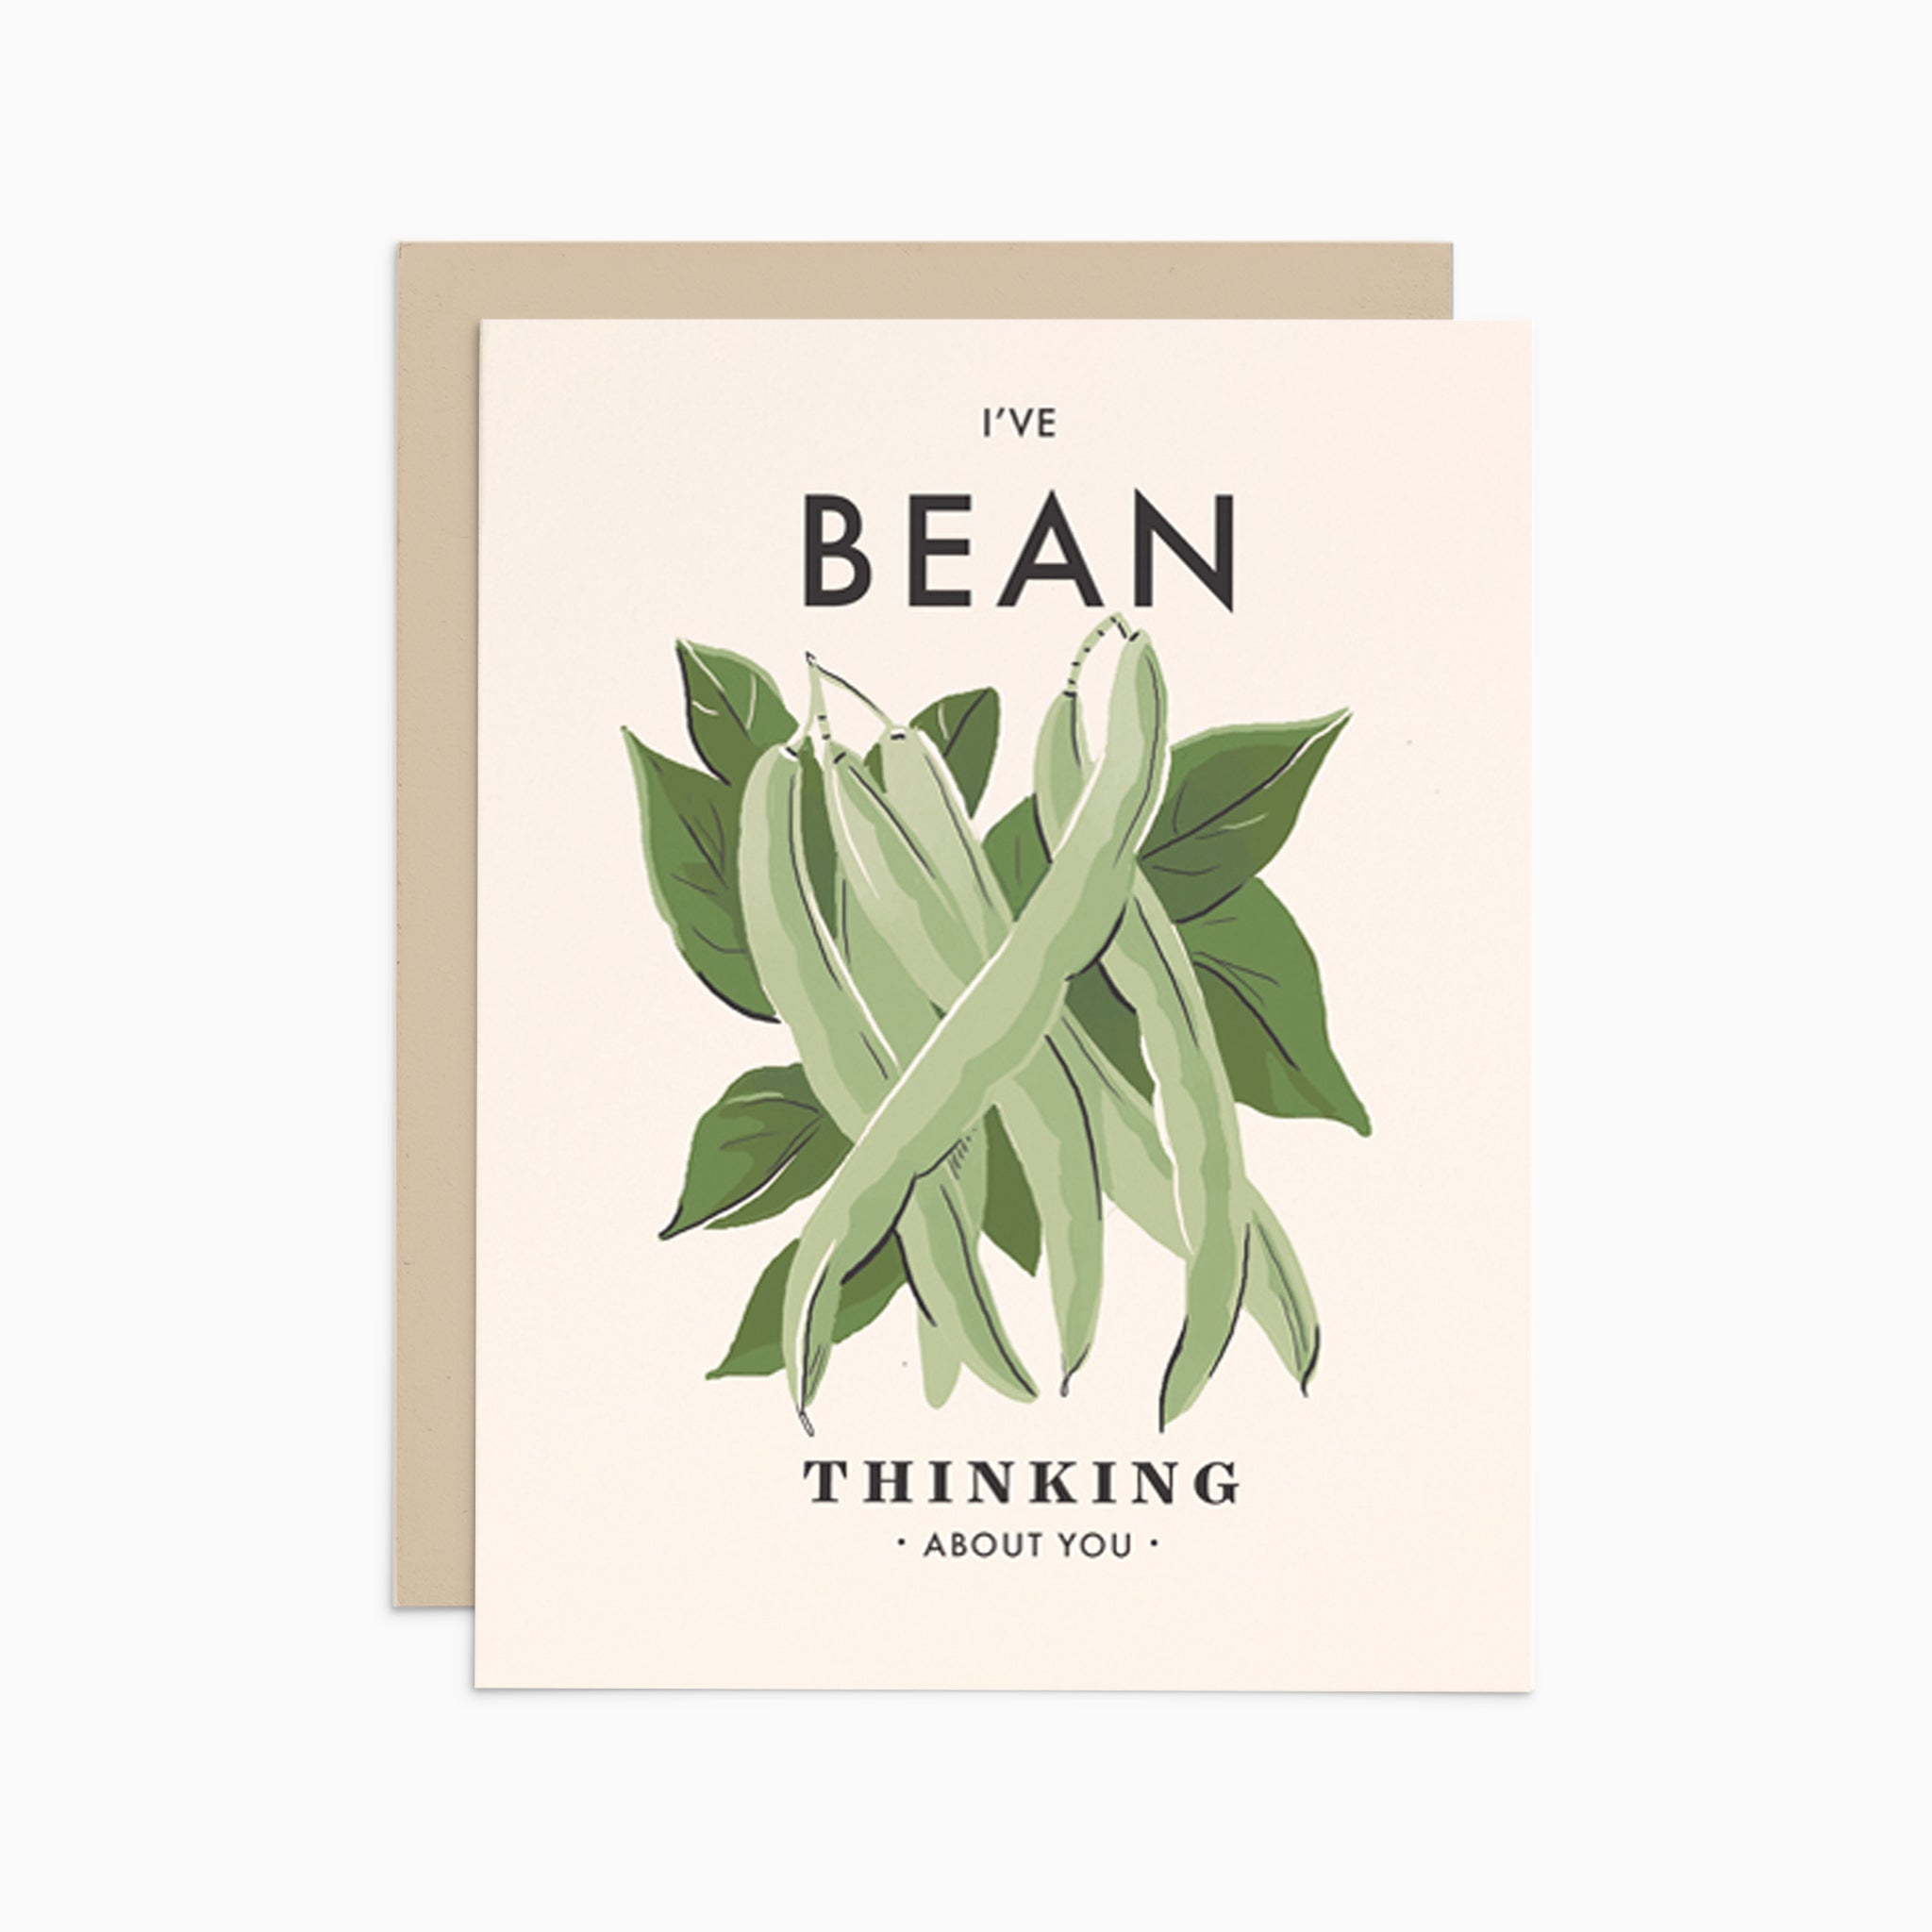 Illustrated 'Thinking About You' card on warm white premium cardstock, featuring a bunch of beans and the text 'I've Bean Thinking About You.'